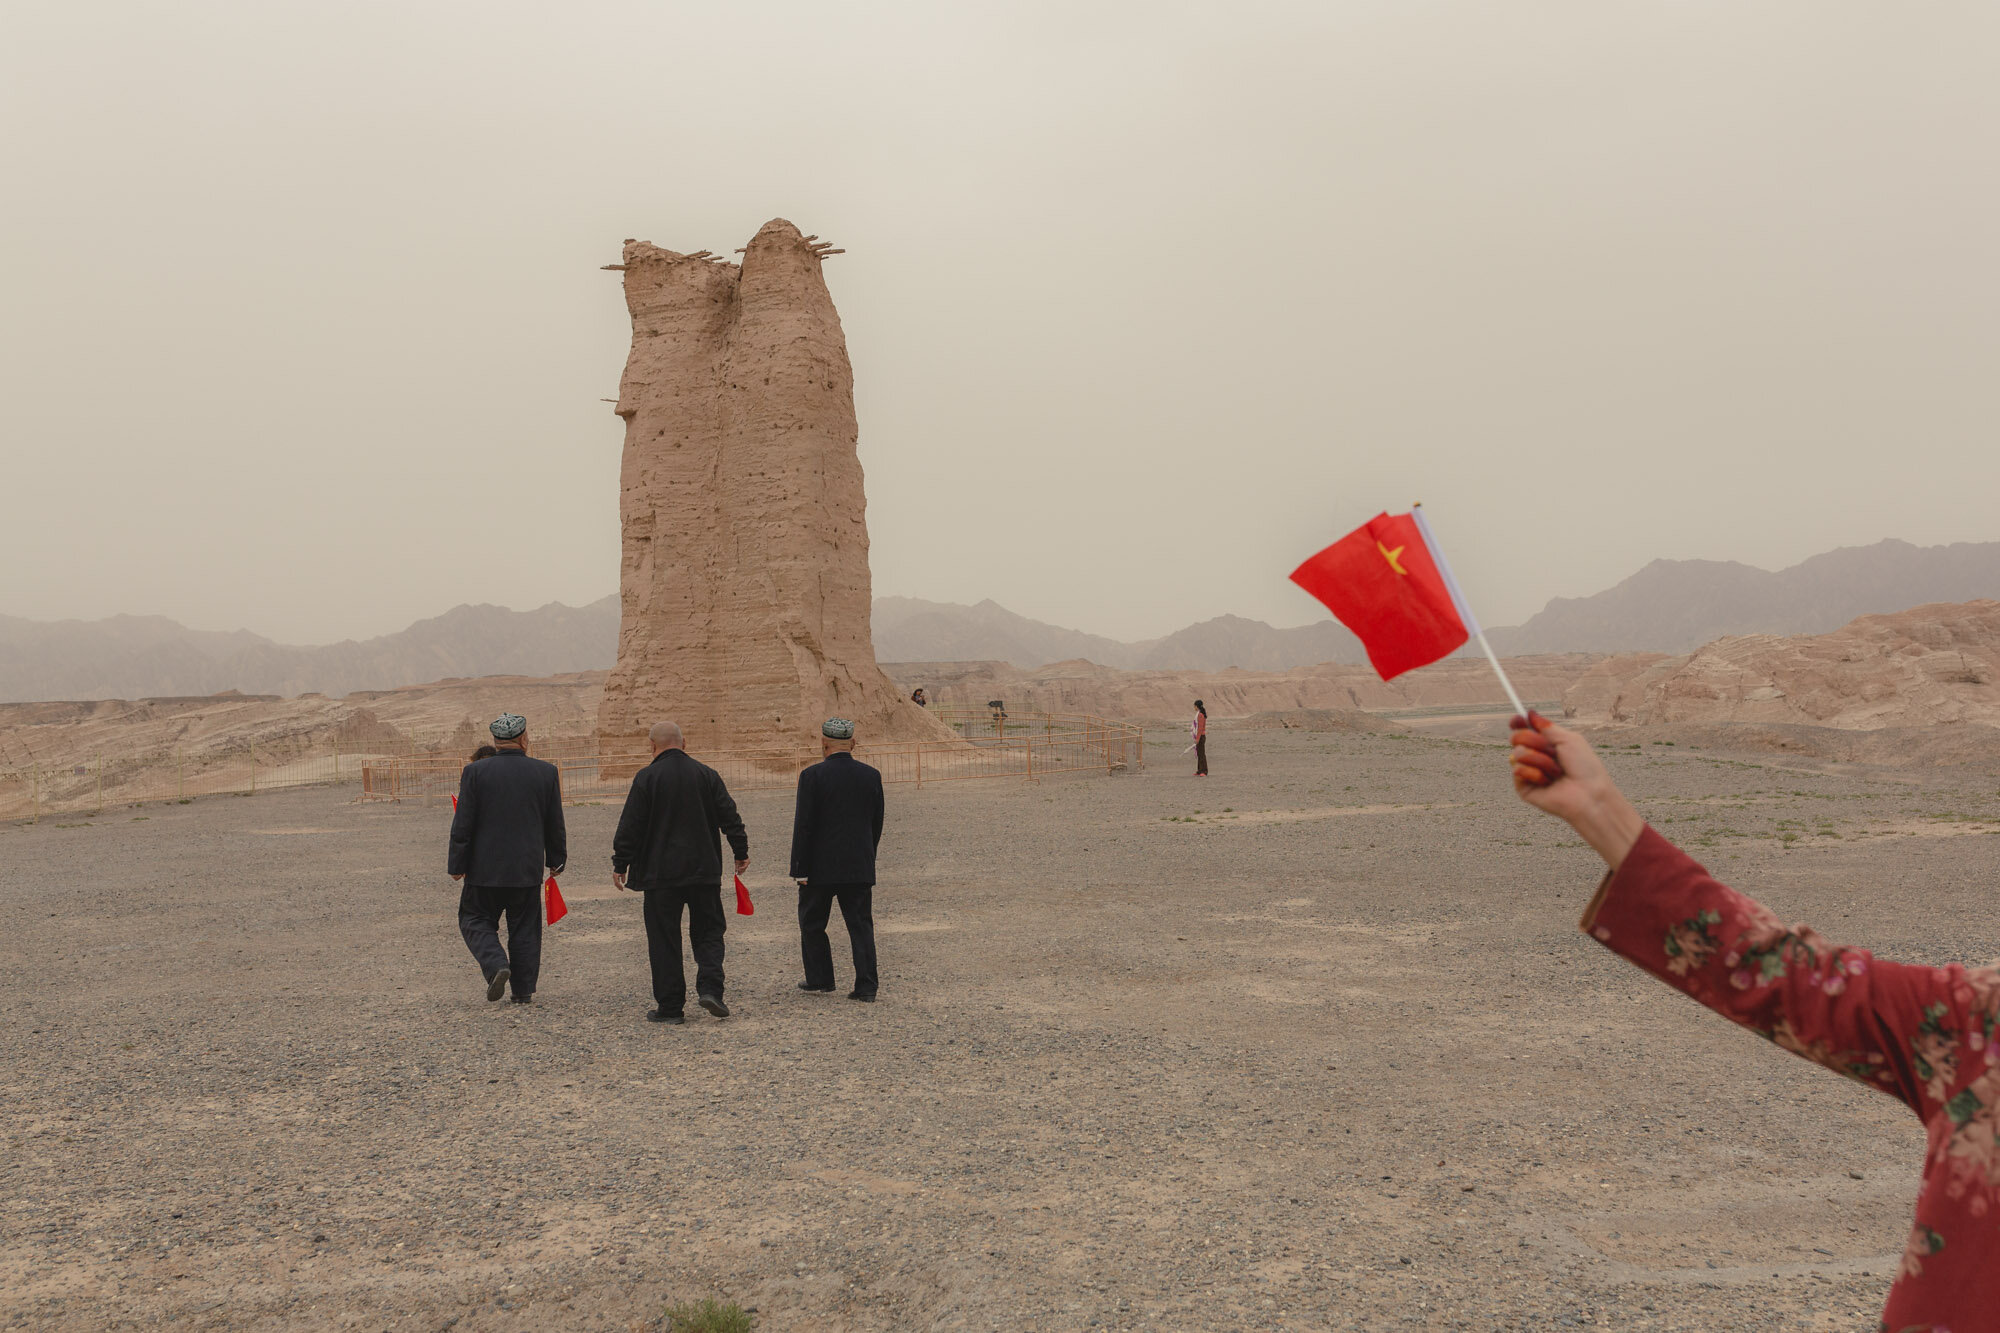  October 2nd 2019. Xinjiang province, China. A group of Uighur tourists on the site of the Kizil Gaha Beacon Tower (克孜尔尕哈烽燧 Kèzīěr gǎhā fēngsuì). Located 10km southeast of Kuqa, this was the site of a military facility built during the Han Dynasty. 